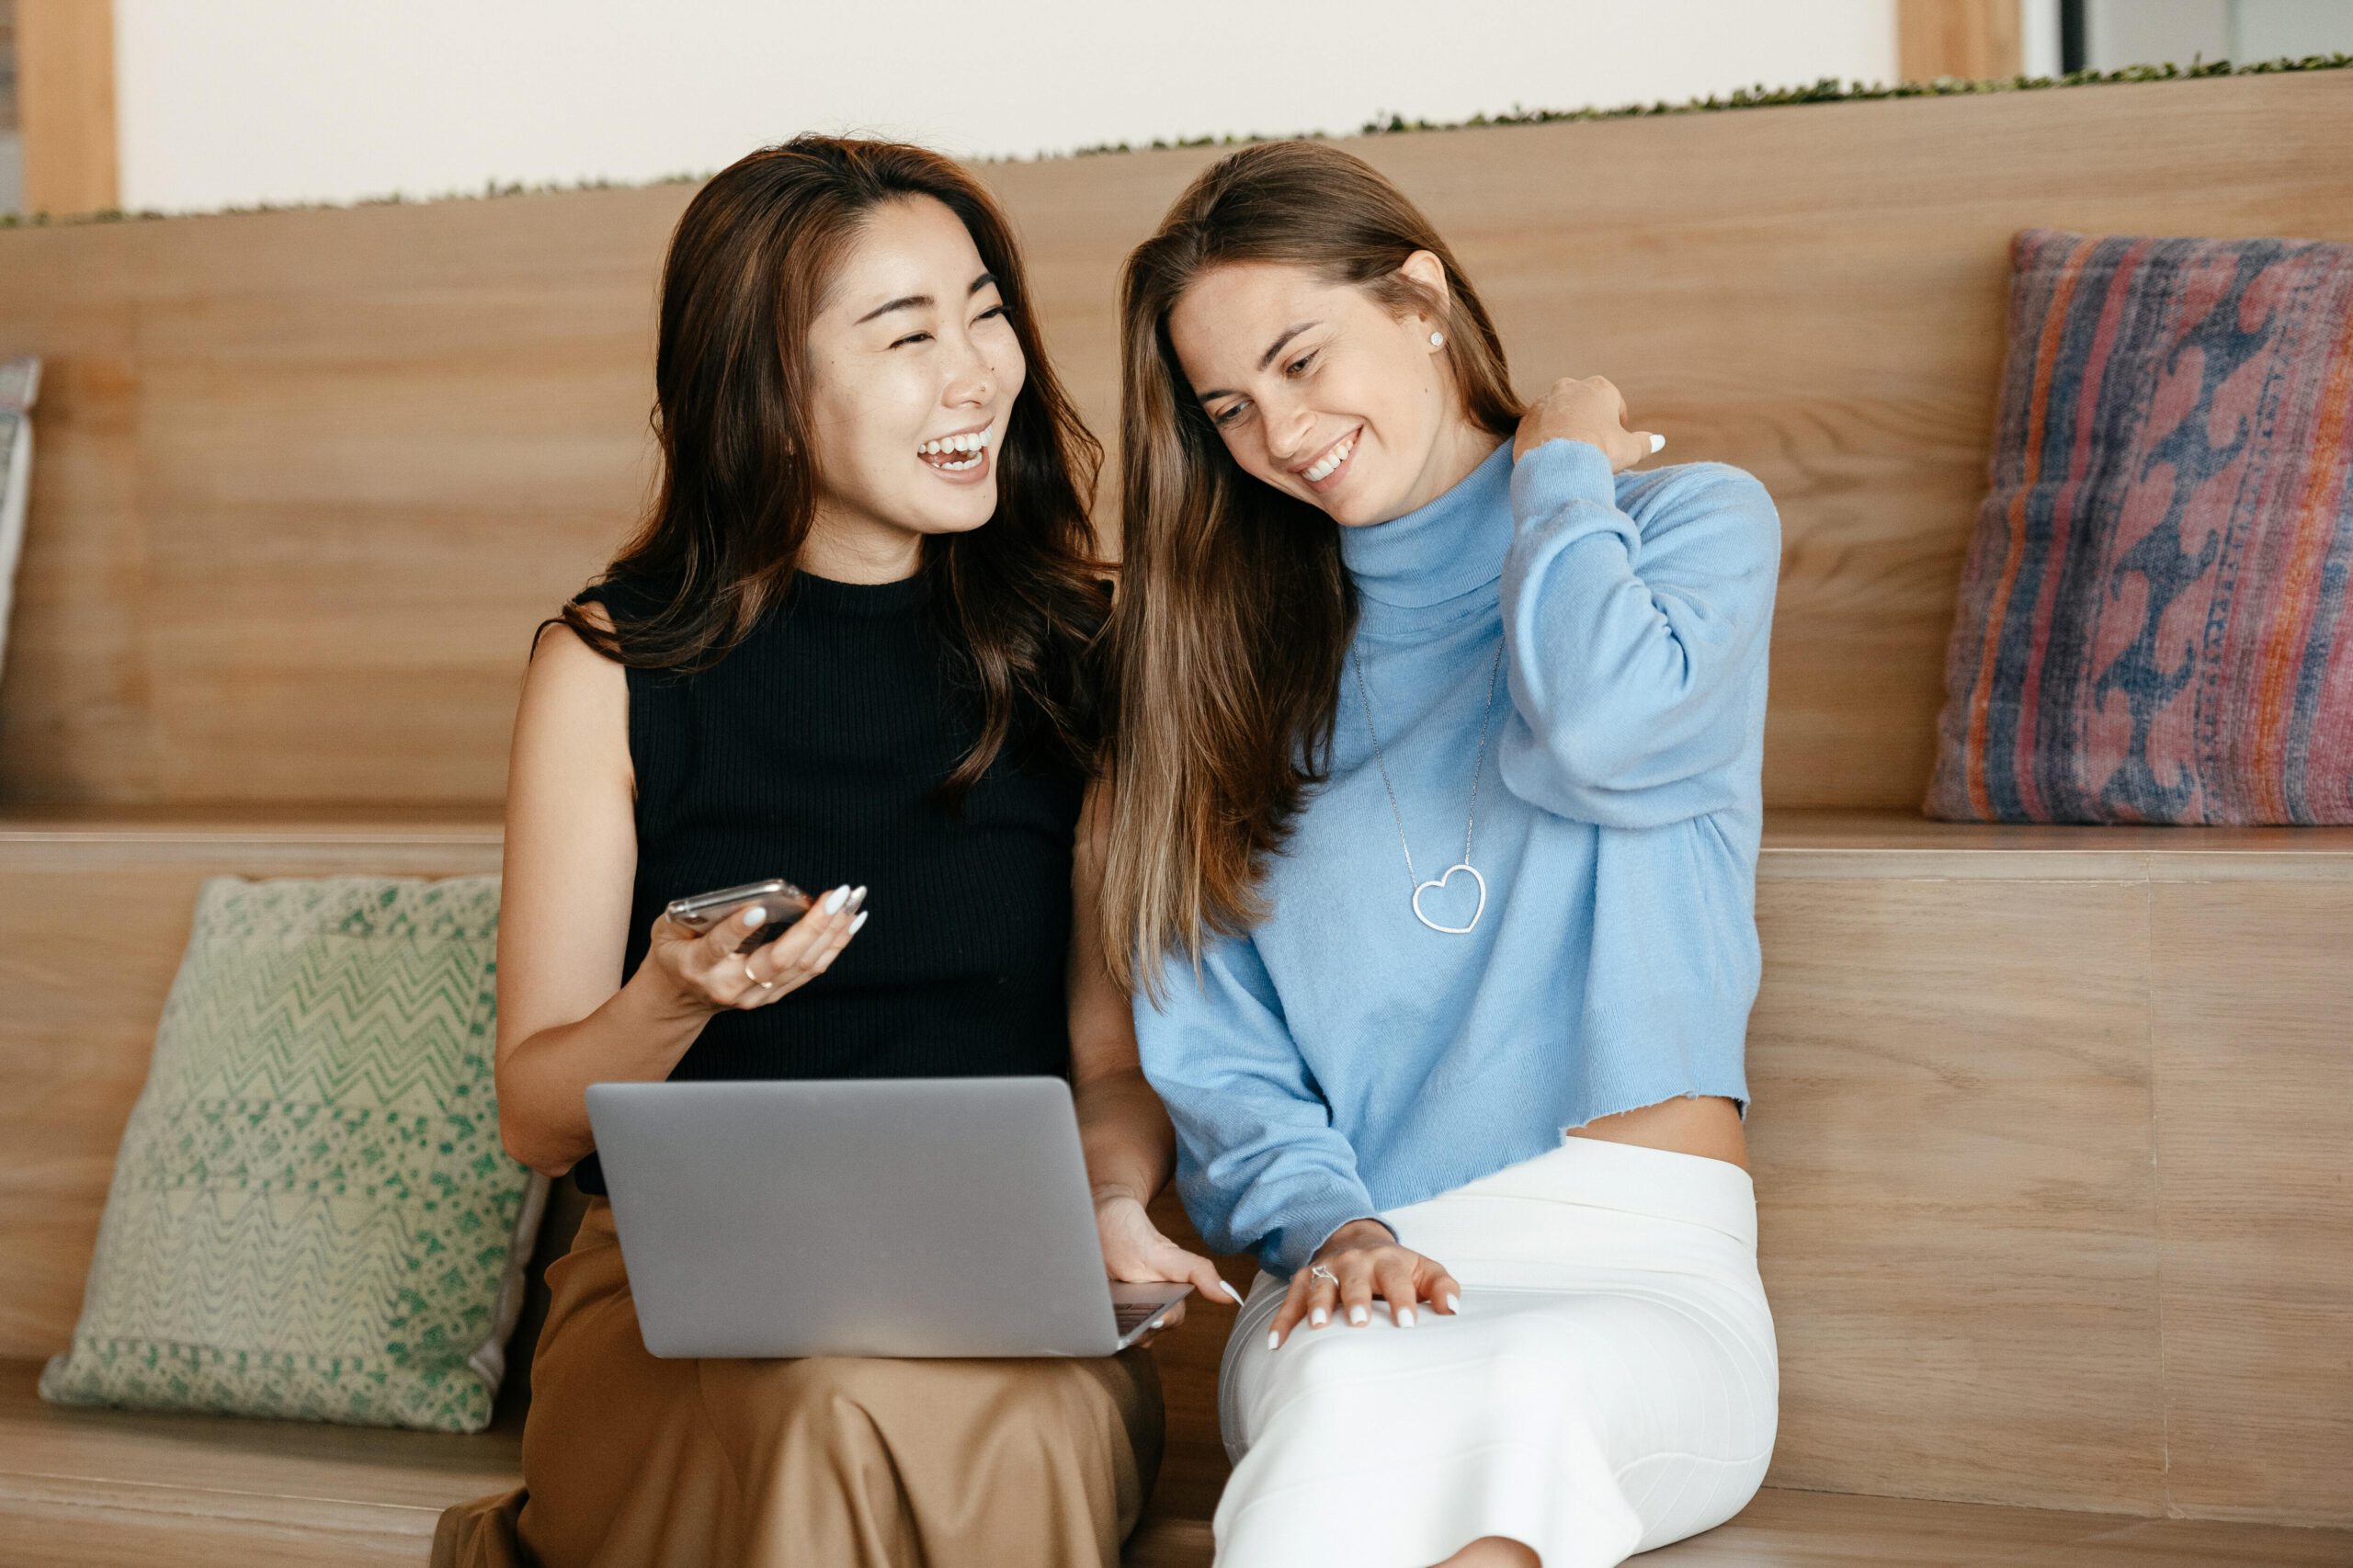 Two girls smiling at phone